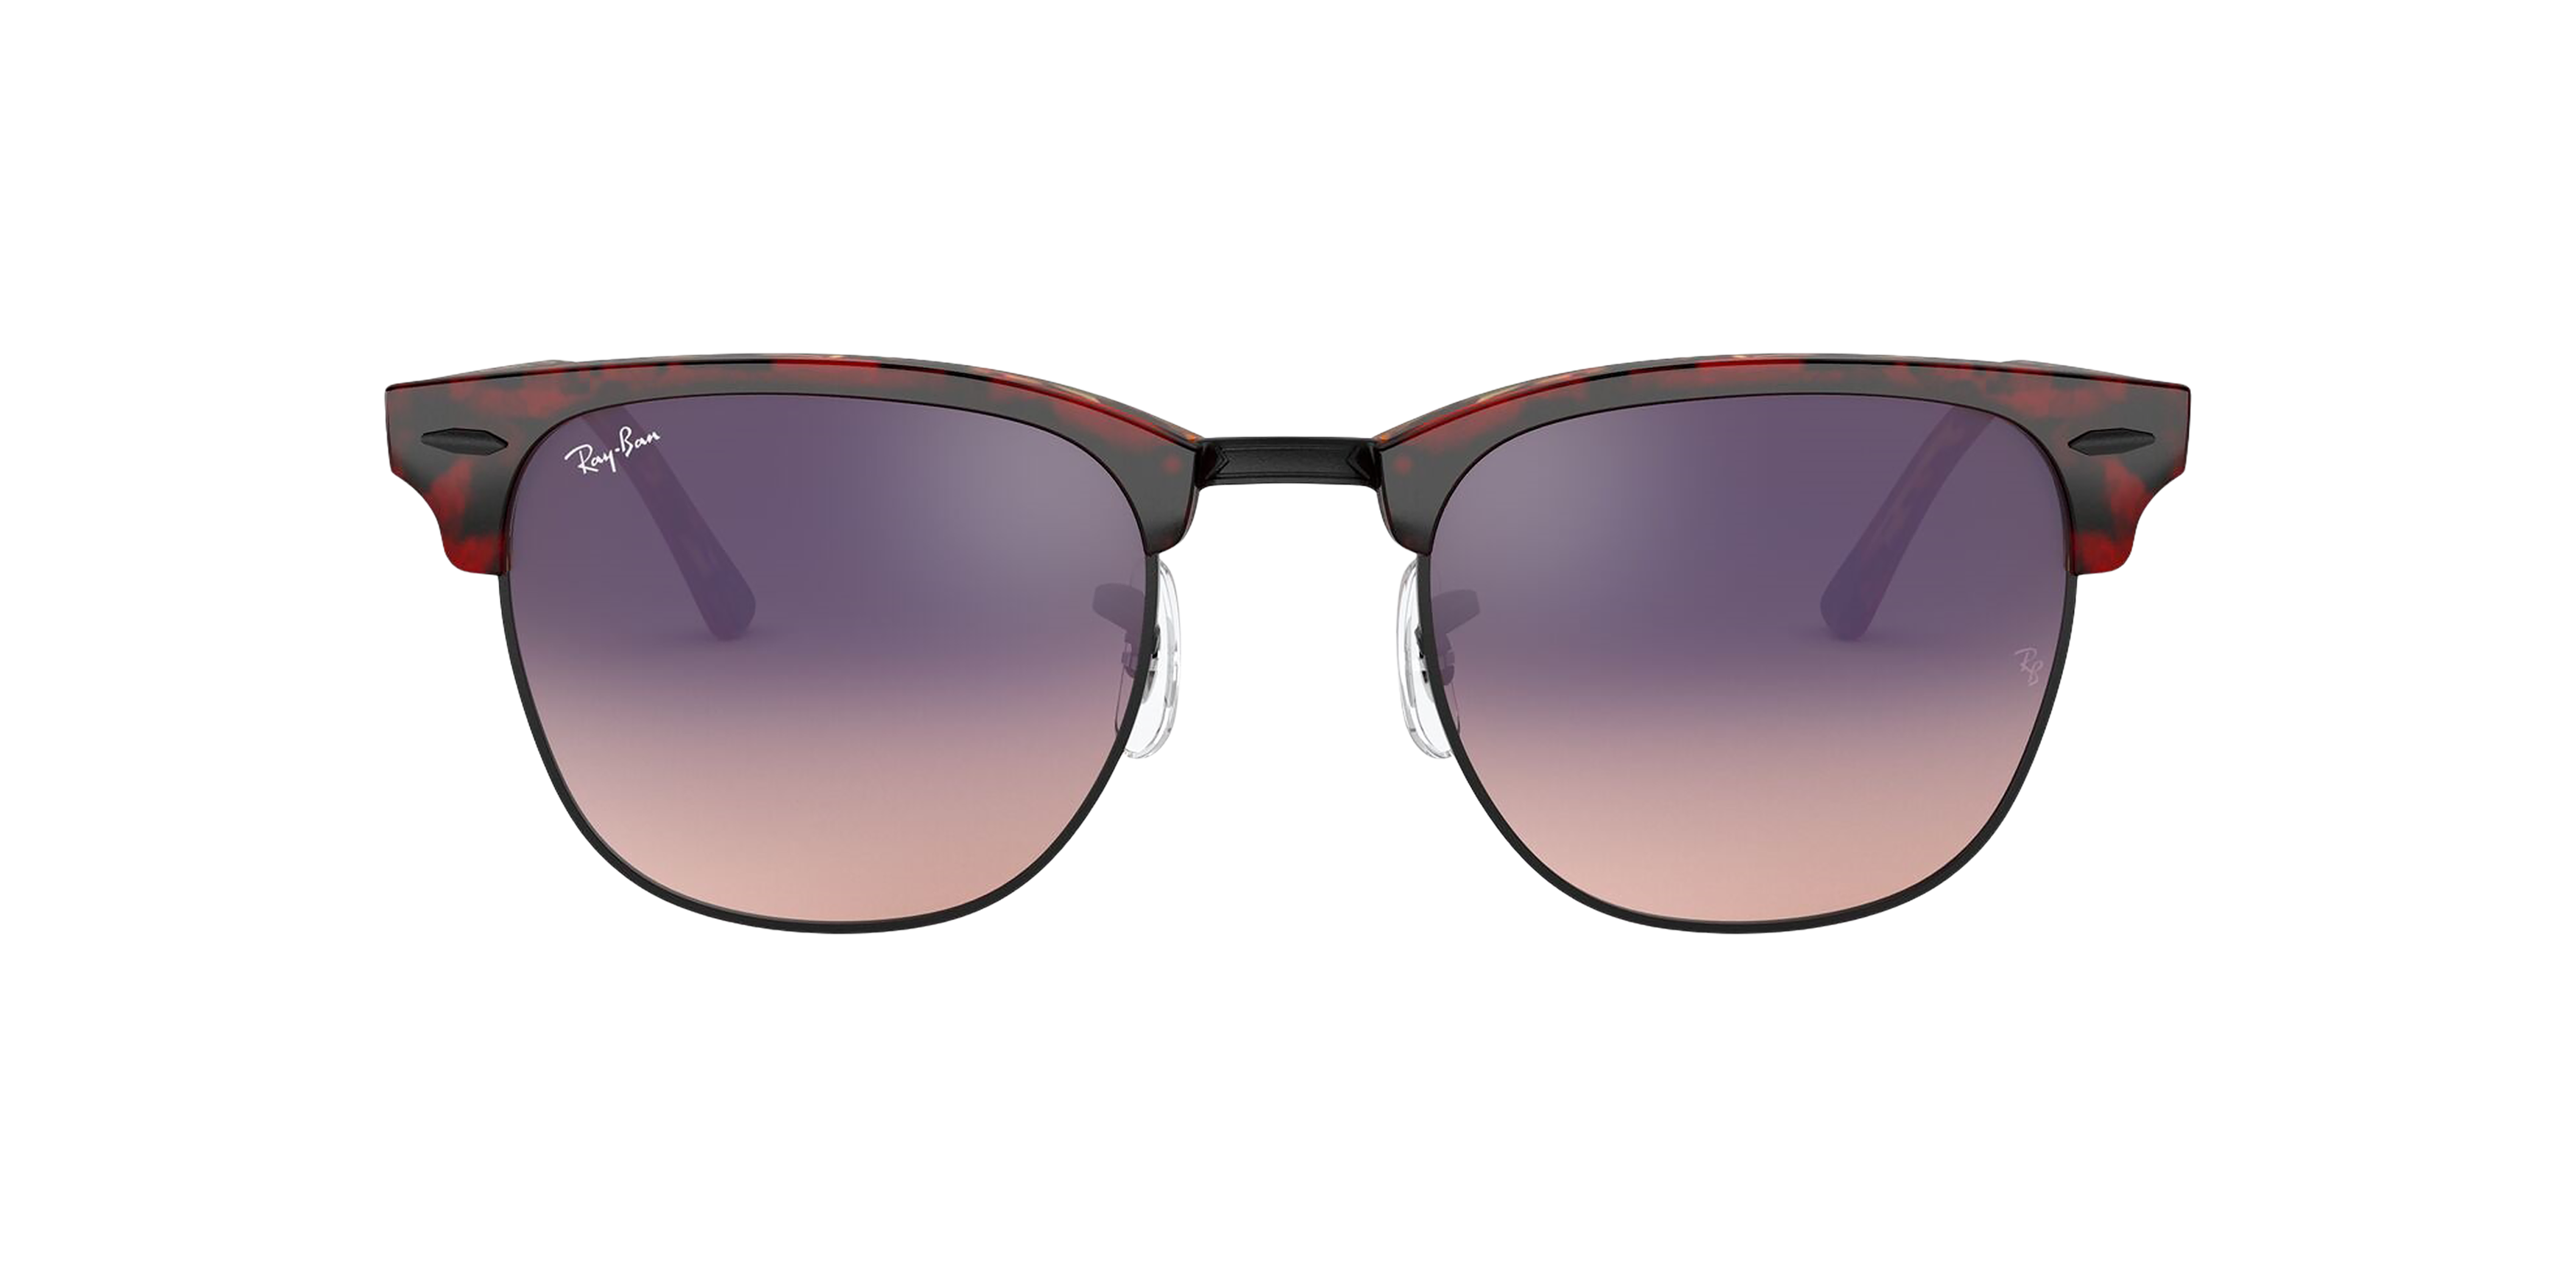 [products.image.front] Ray-Ban Clubmaster Color Mix RB3016 12753B